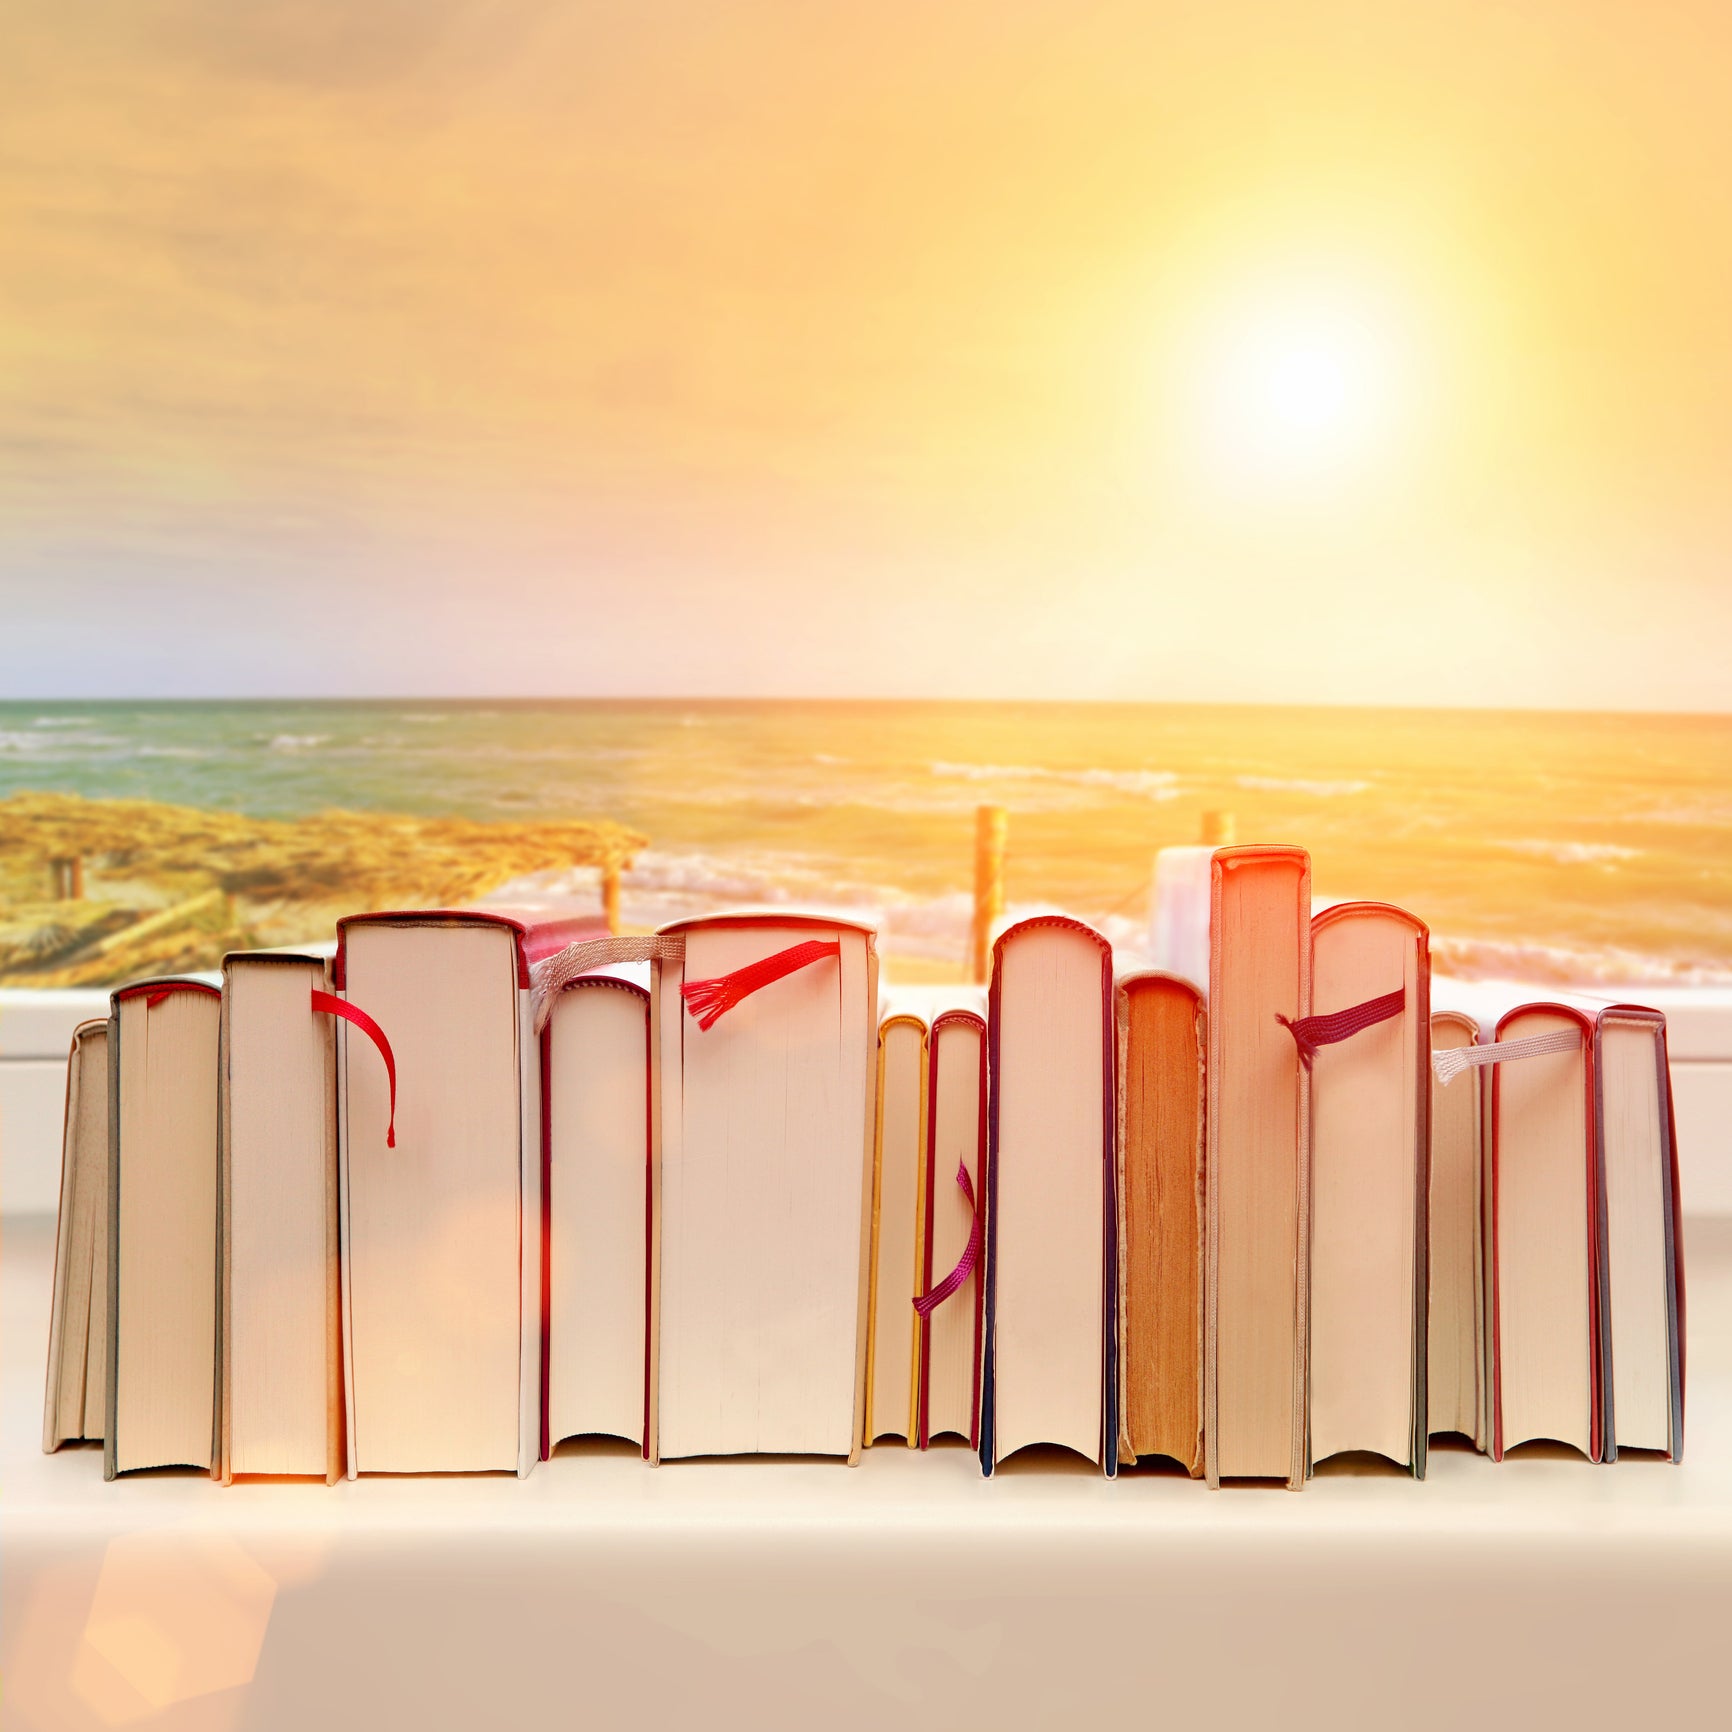 Books aligned on window sill with a seaside sunset background.